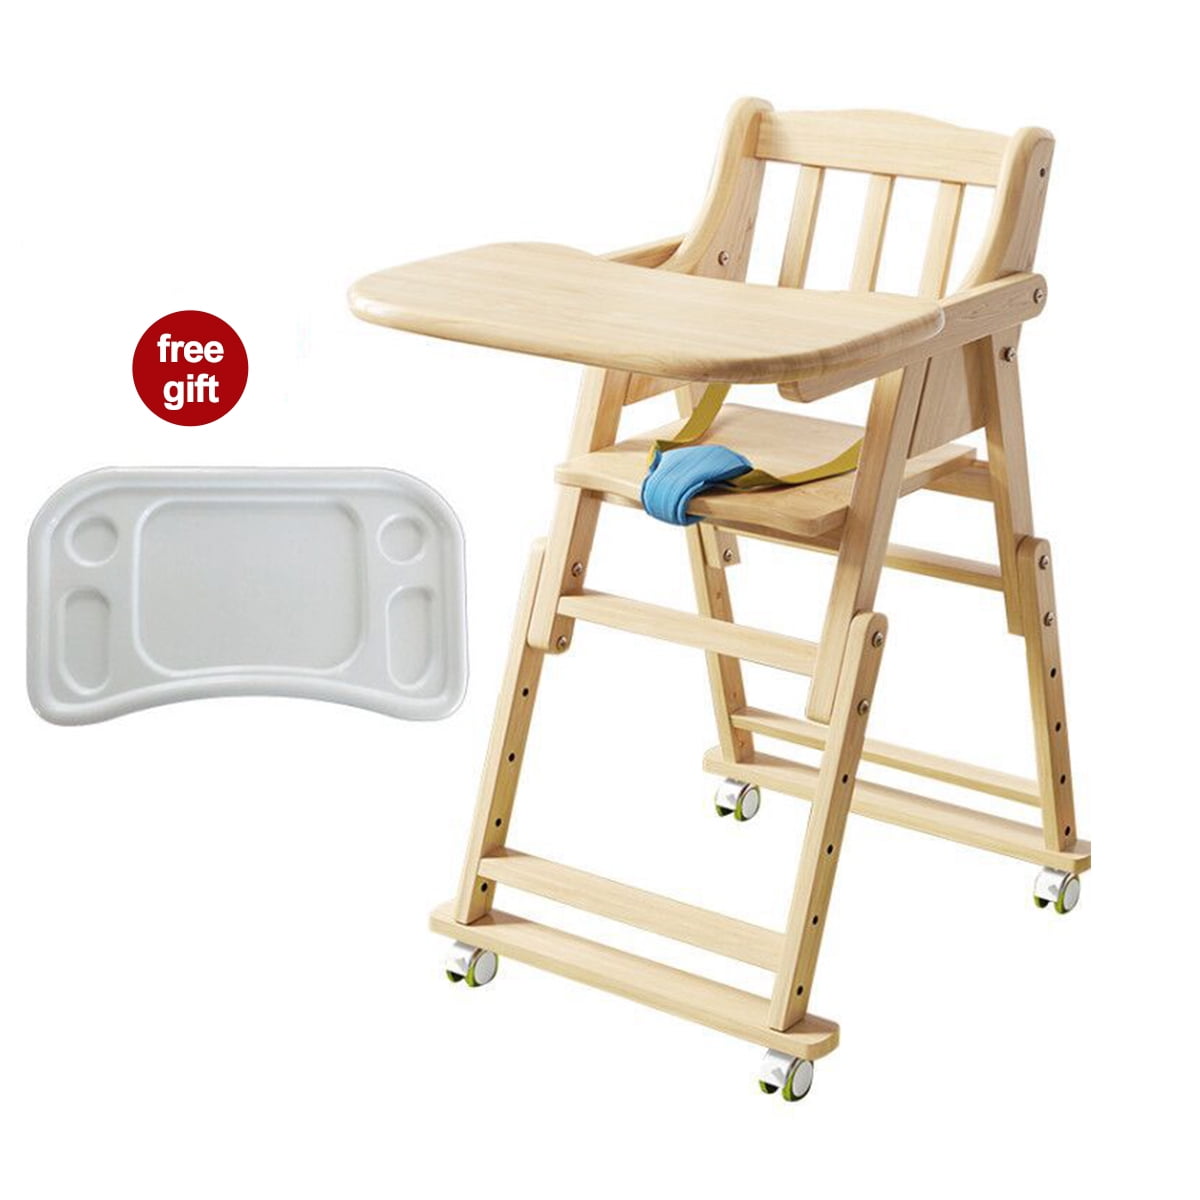 New Restaurant Style Wooden High Chair with safety belt SOLID WOOD $10 Rebate 